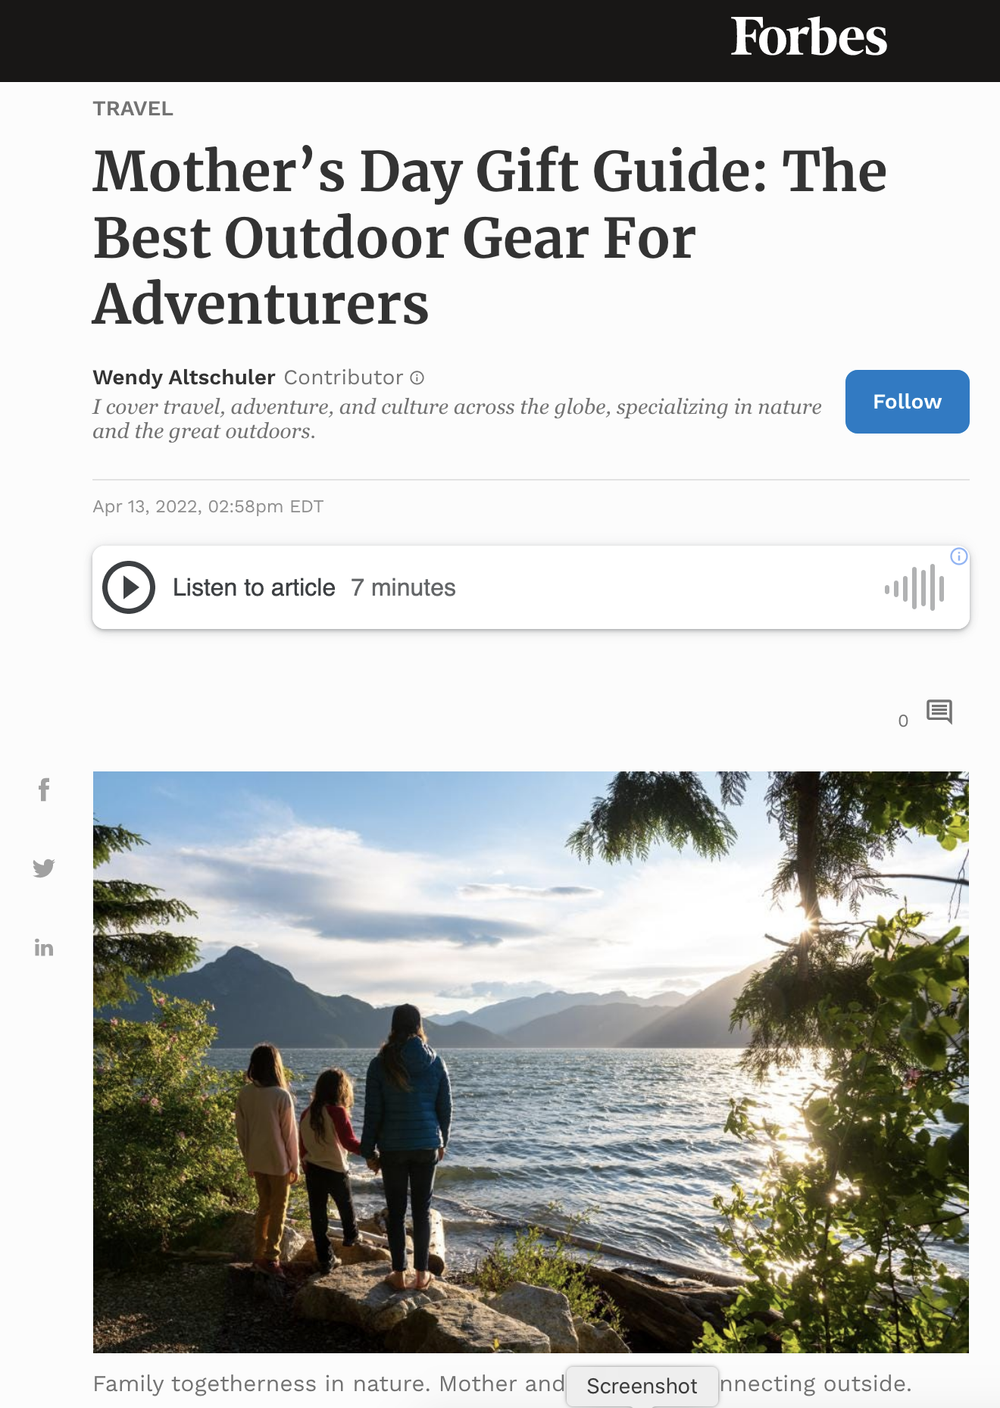 Mother’s Day Gift Guide: The Best Outdoor Gear For Adventurers